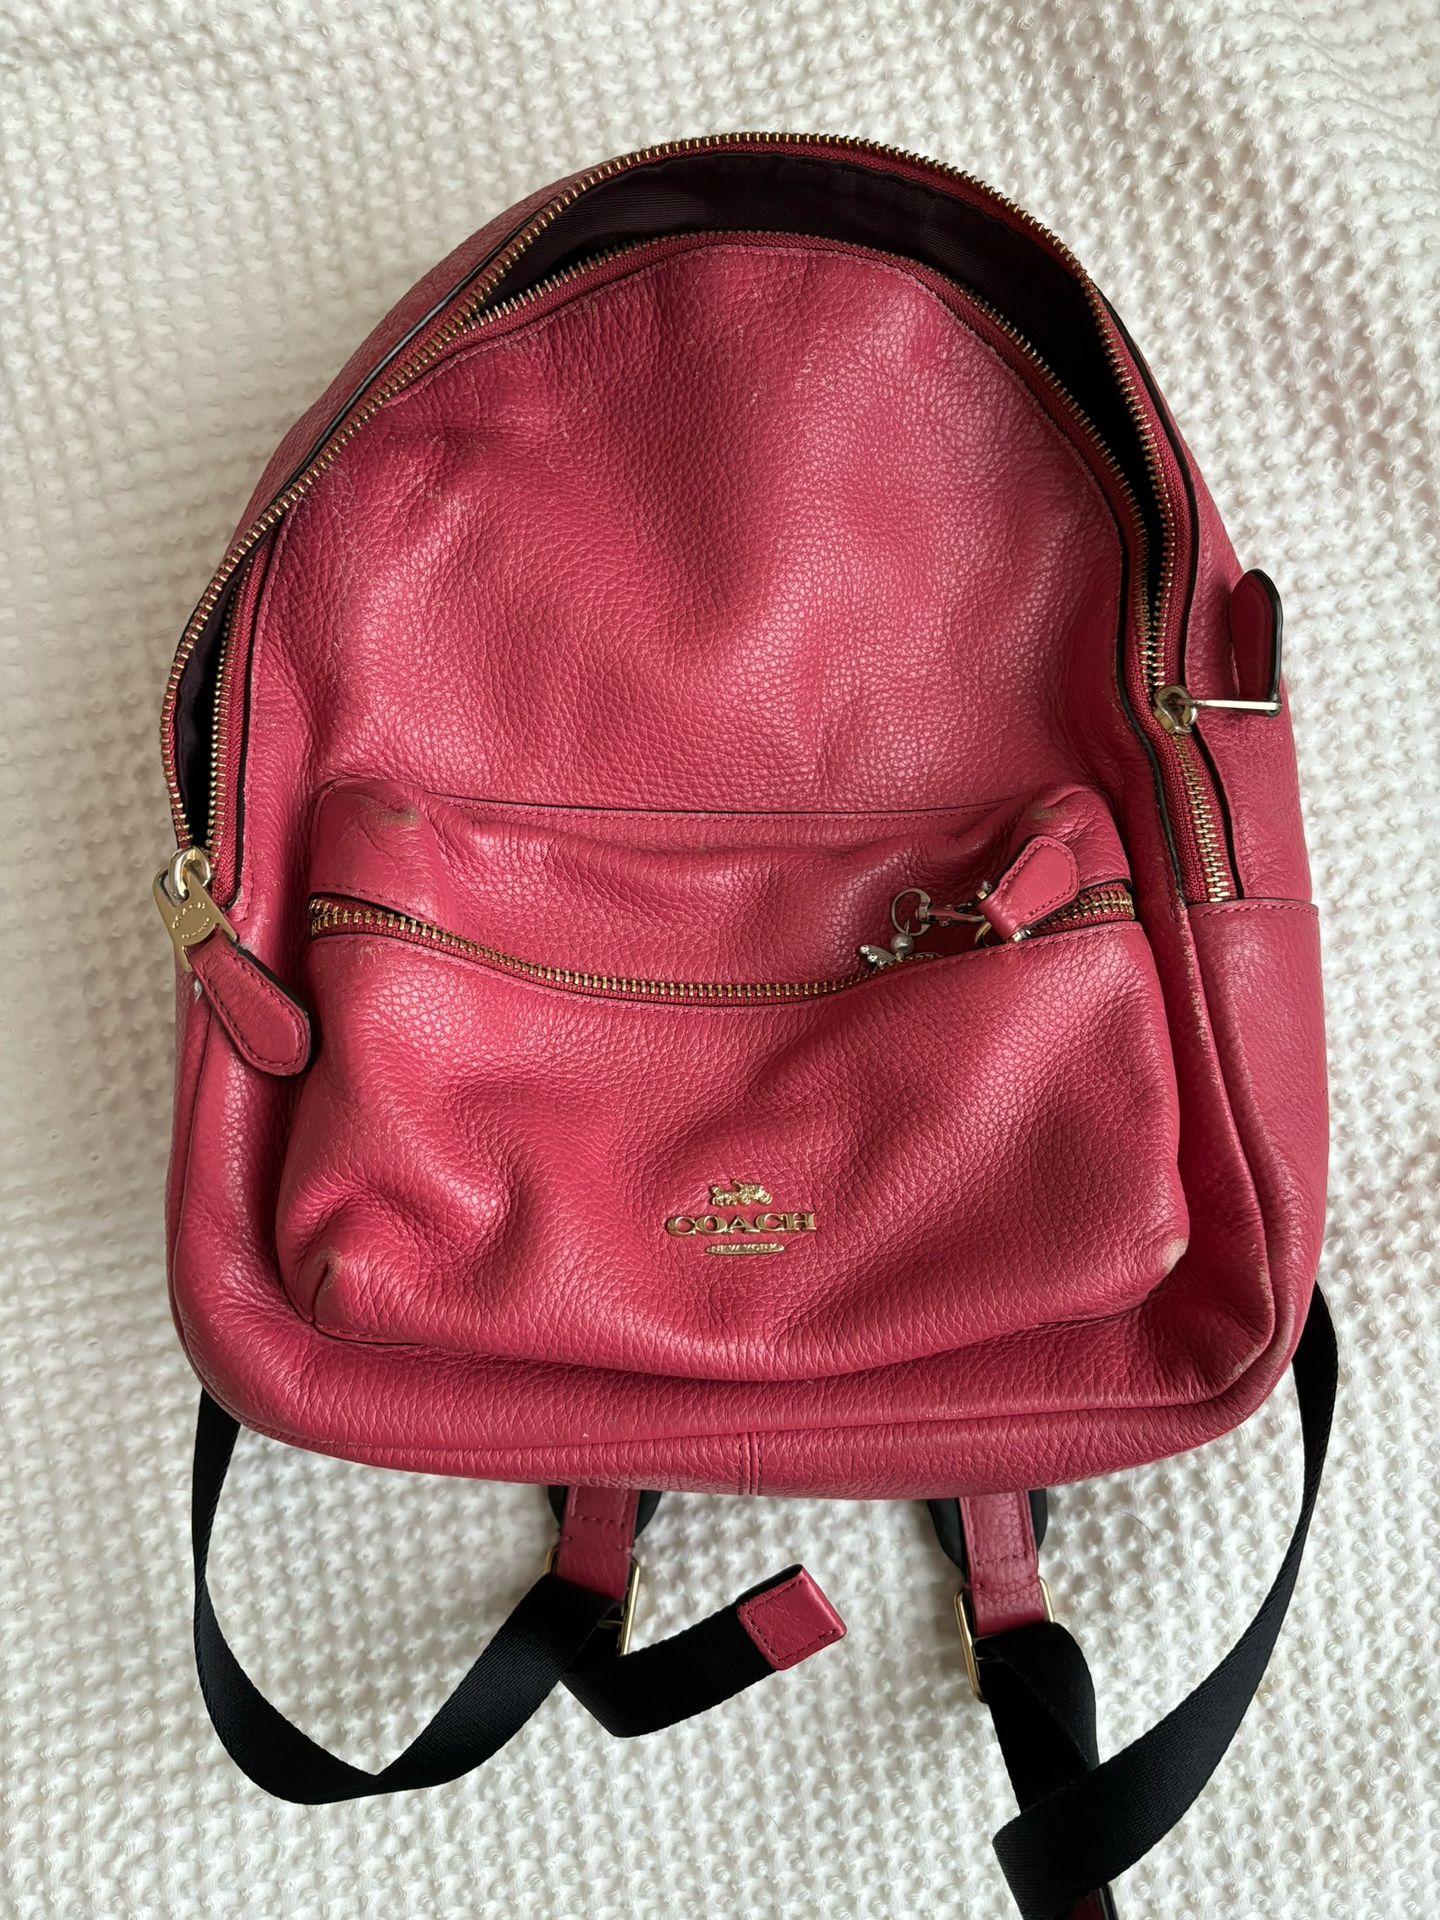 Authentic Coach Backpack - Pink Leather 